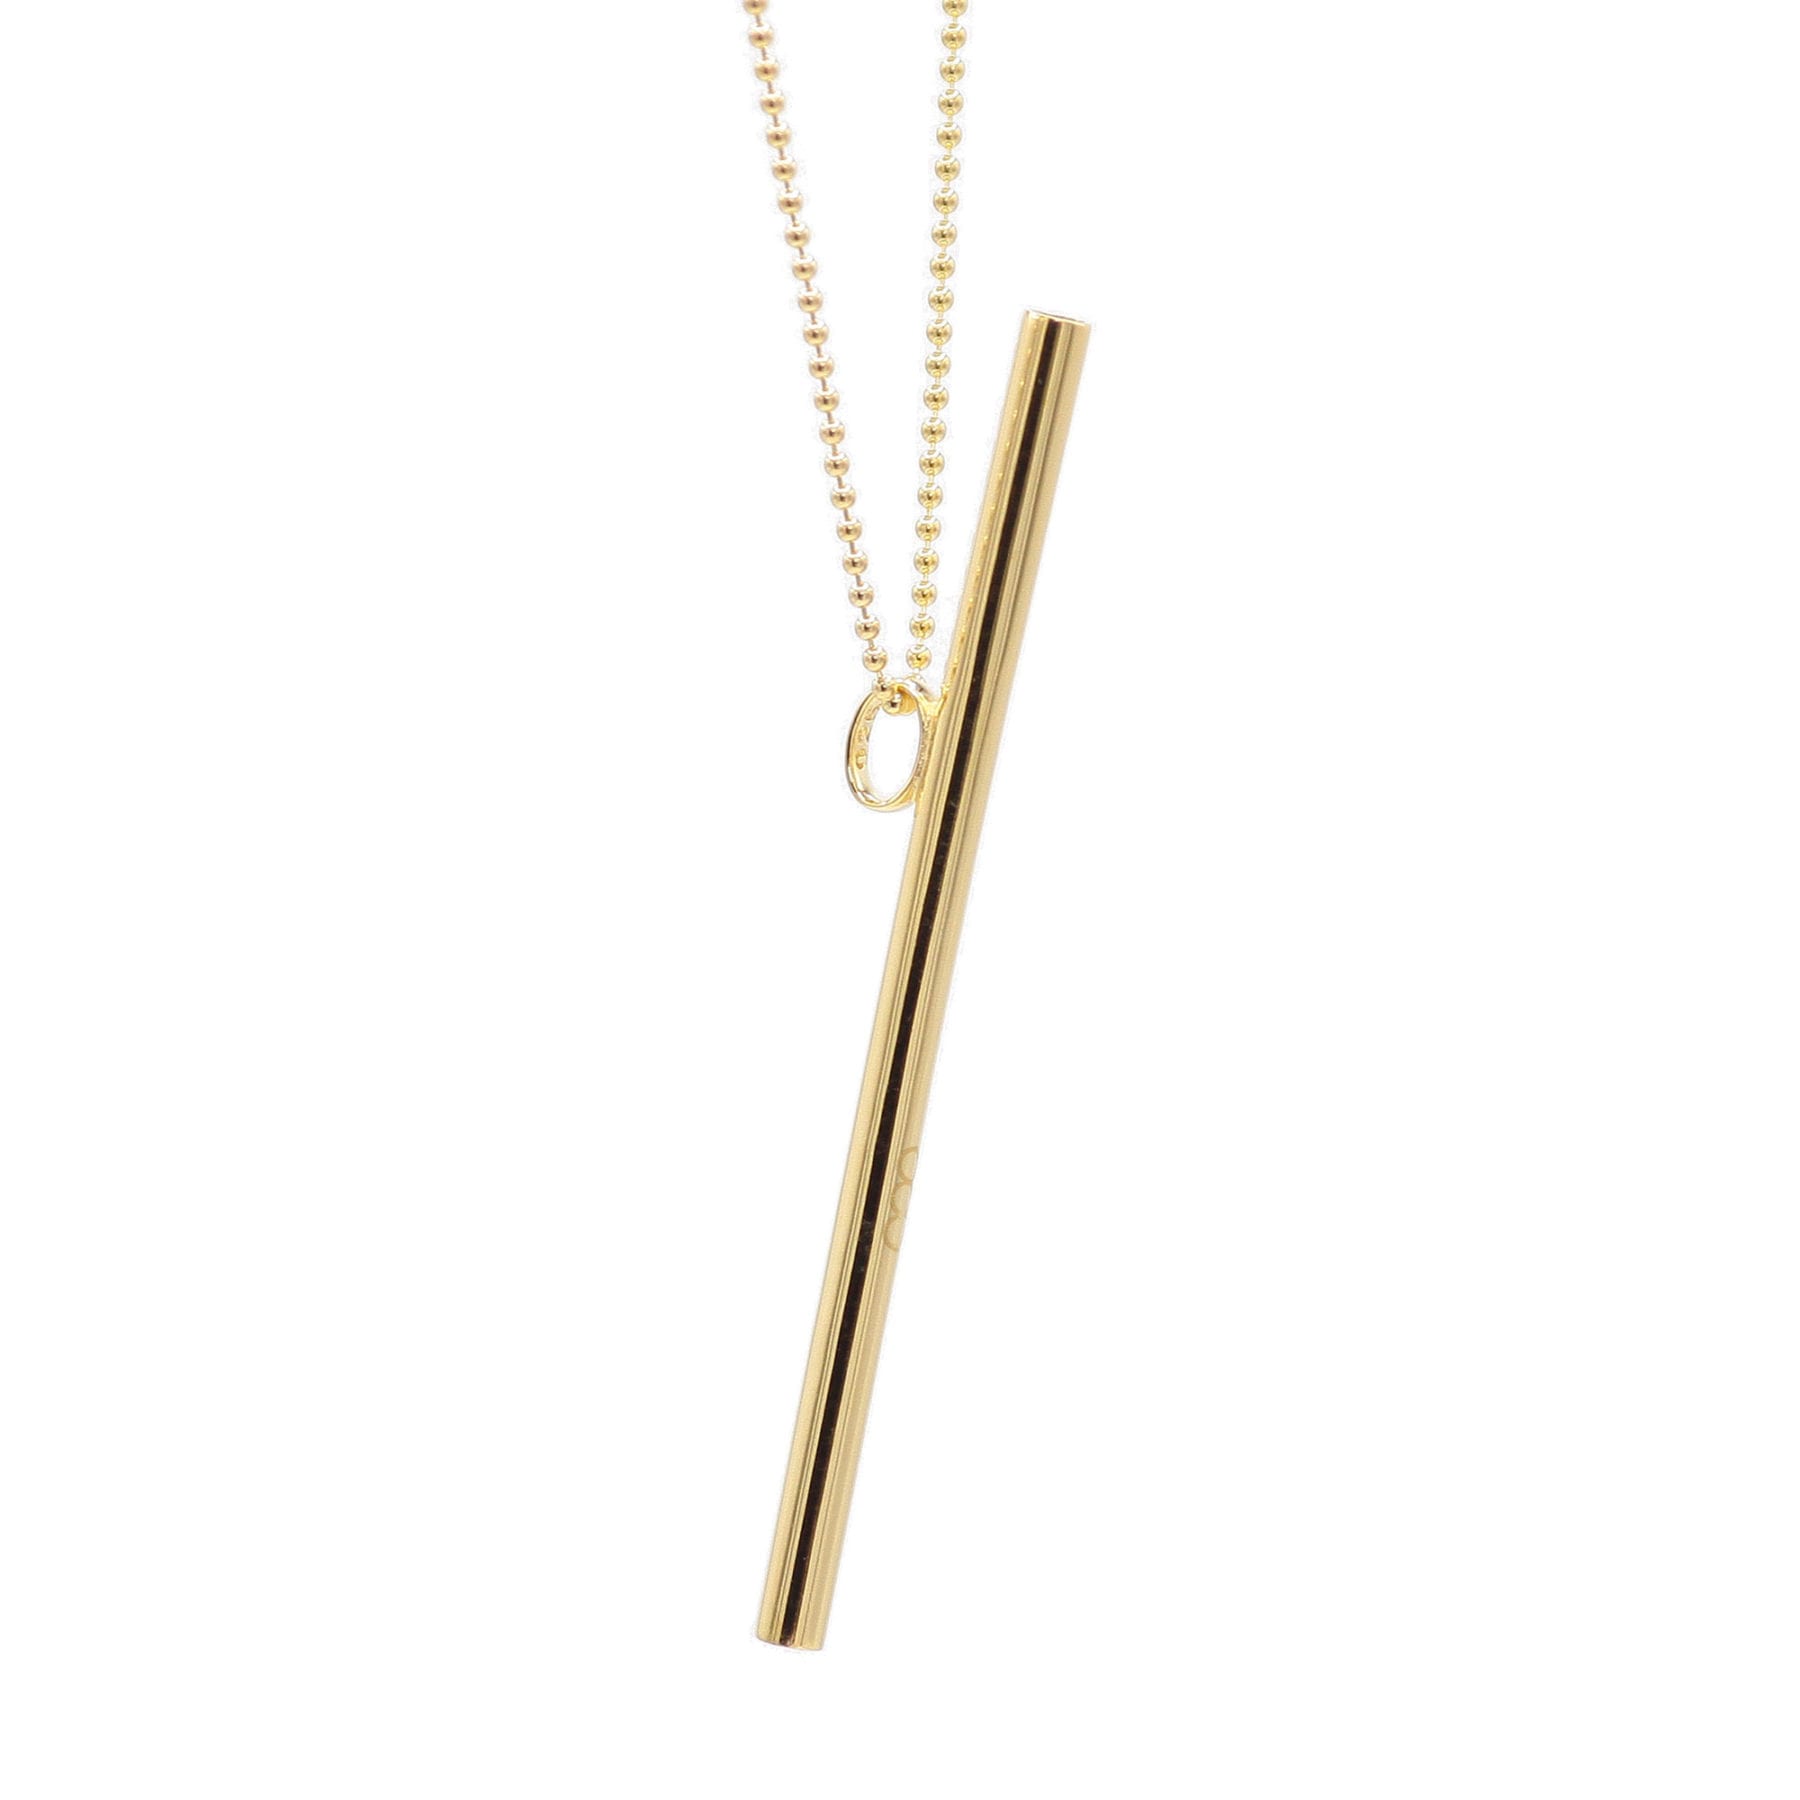 OOVO Vocal Straw Necklace Gold